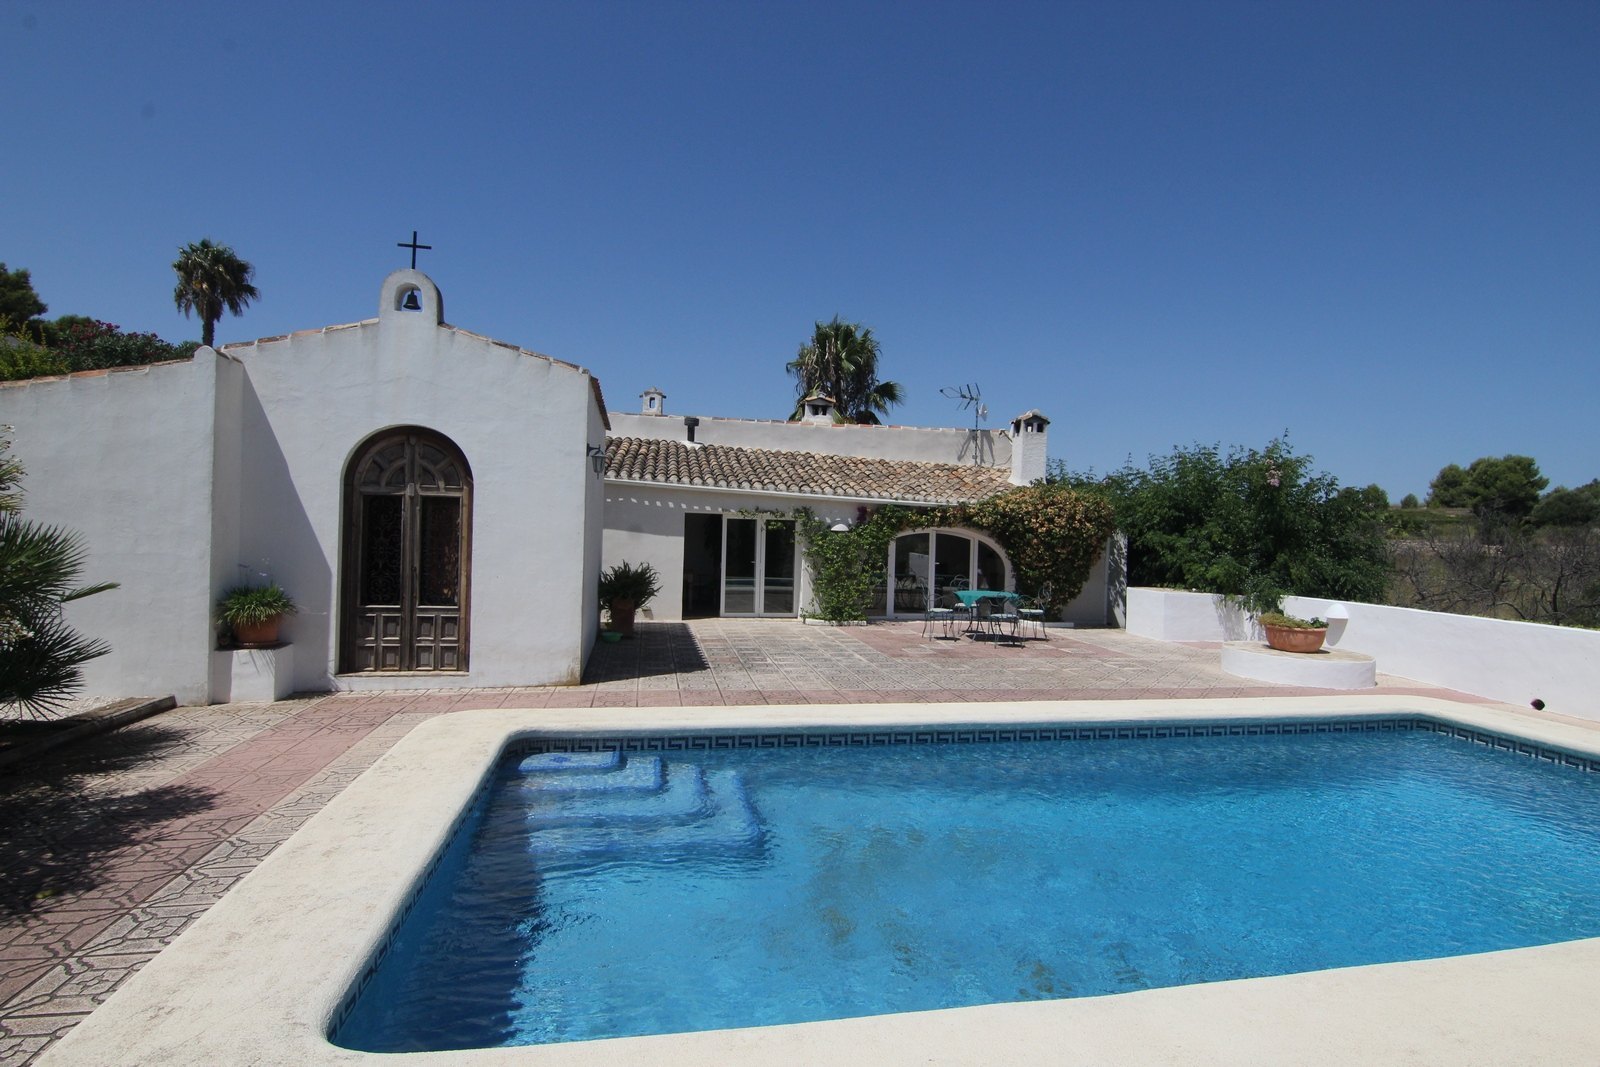 Refurbished Finca for sale with separate suite for guess and swimming pool in Javeas country site.